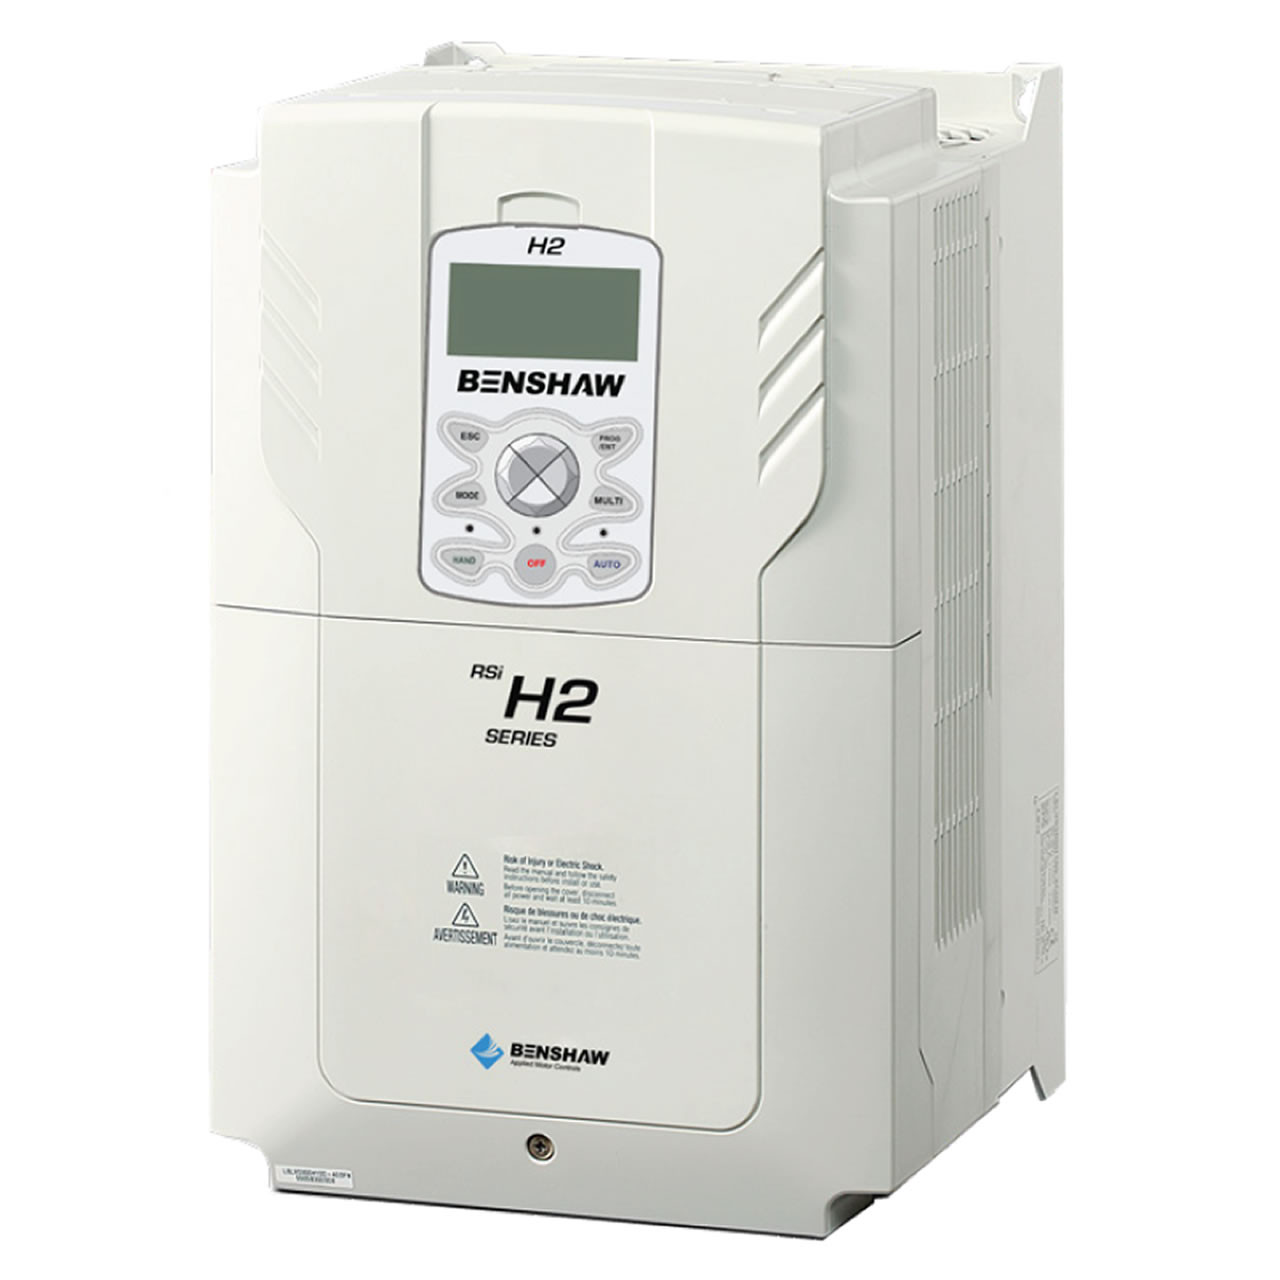 Benshaw RSI-040-H2-4C variable frequency drive